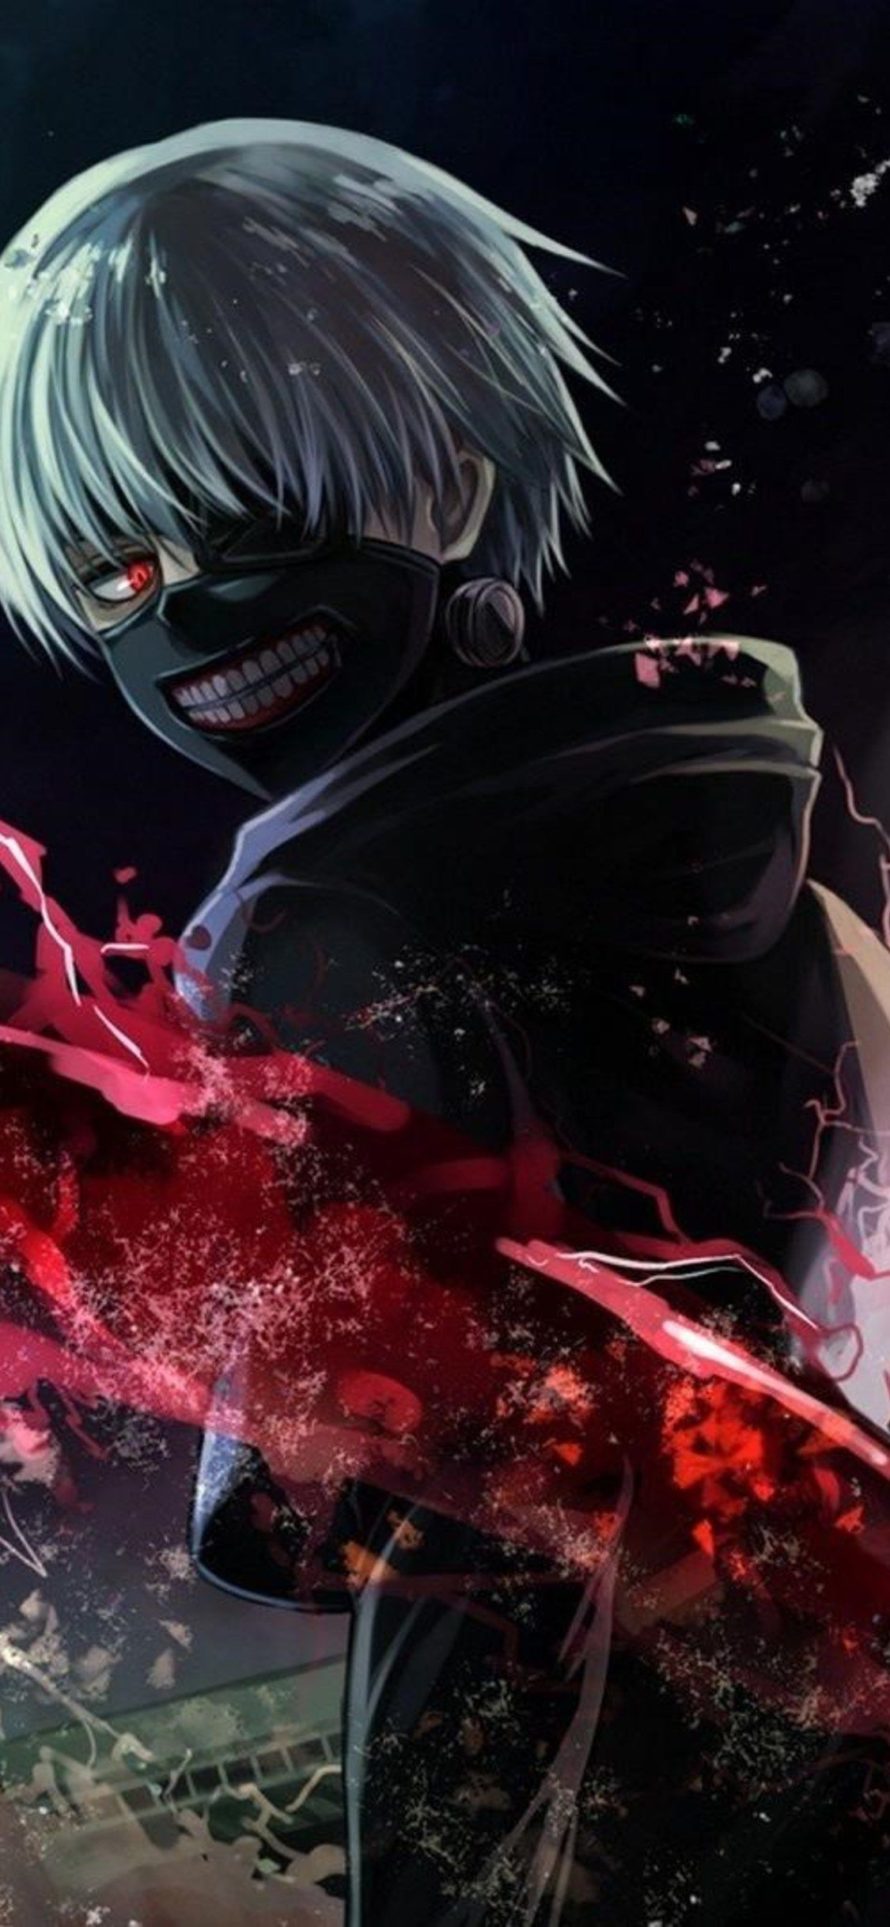 Tokyo Ghoul Wallpaper For Android Phone - Anime Wallpaper Tokyo Ghoul - HD Wallpaper 